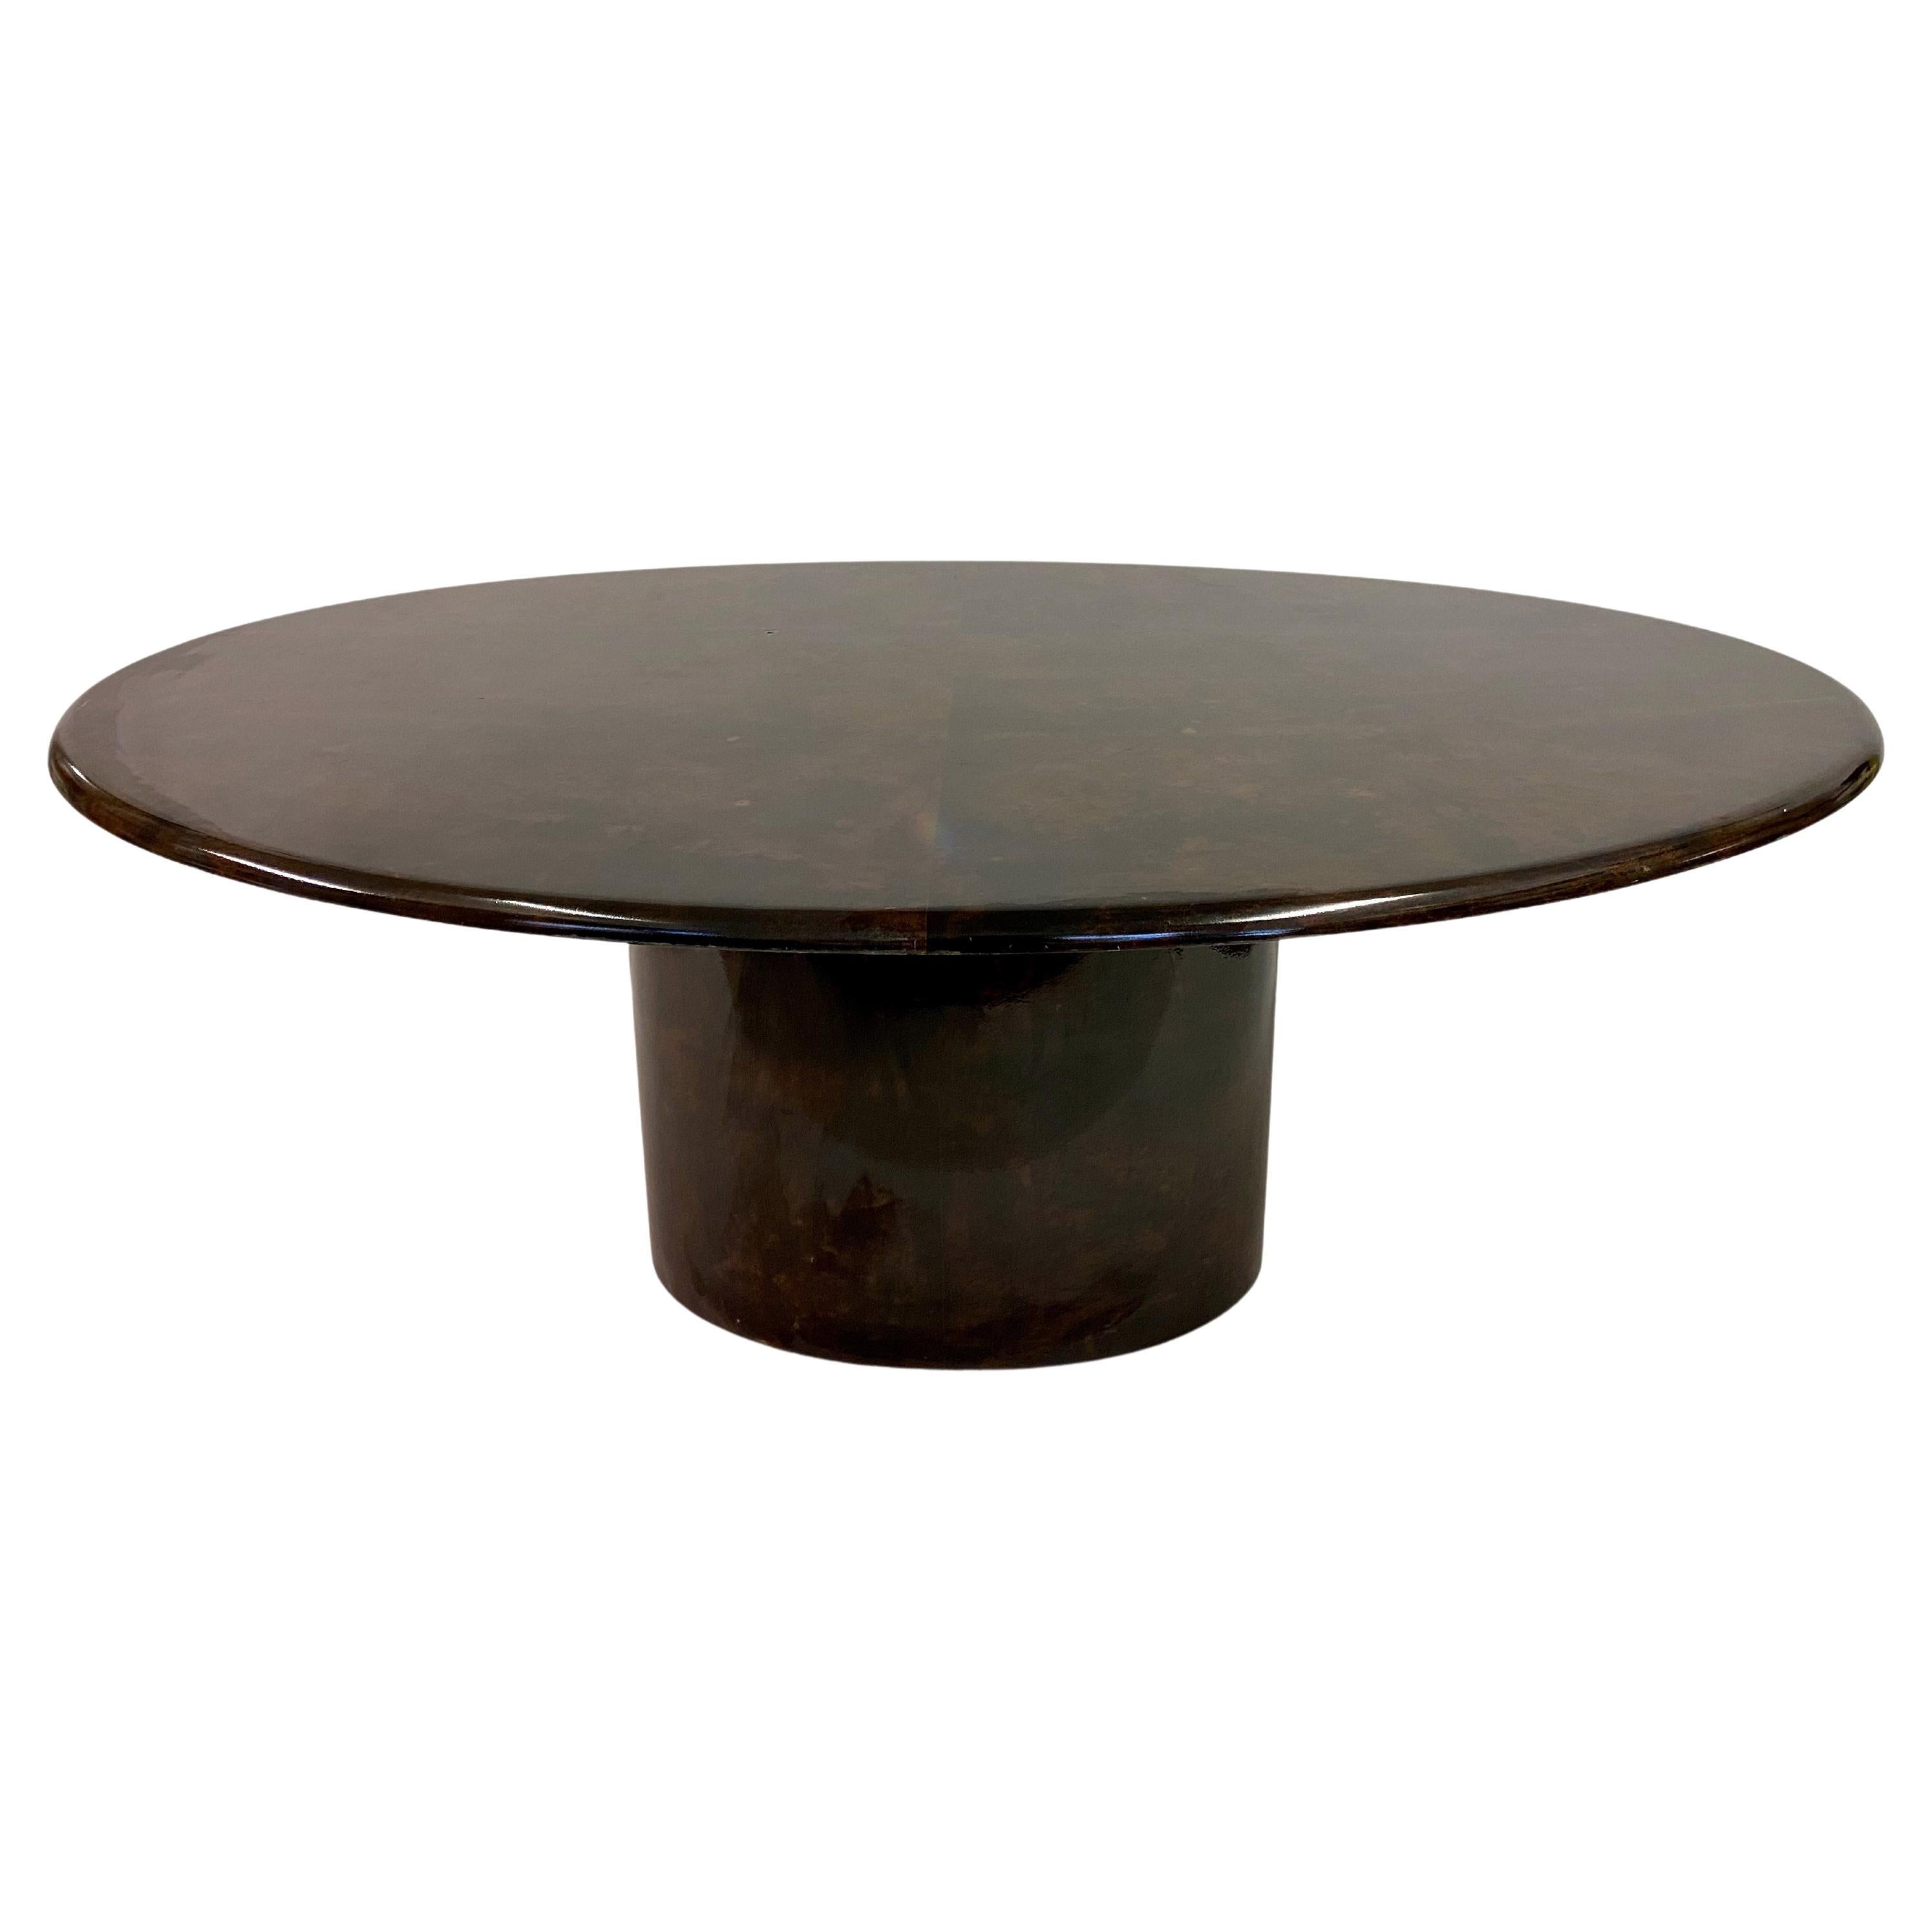 Brown Lacquered Goatskin Oval Dining Table by Aldo Tura